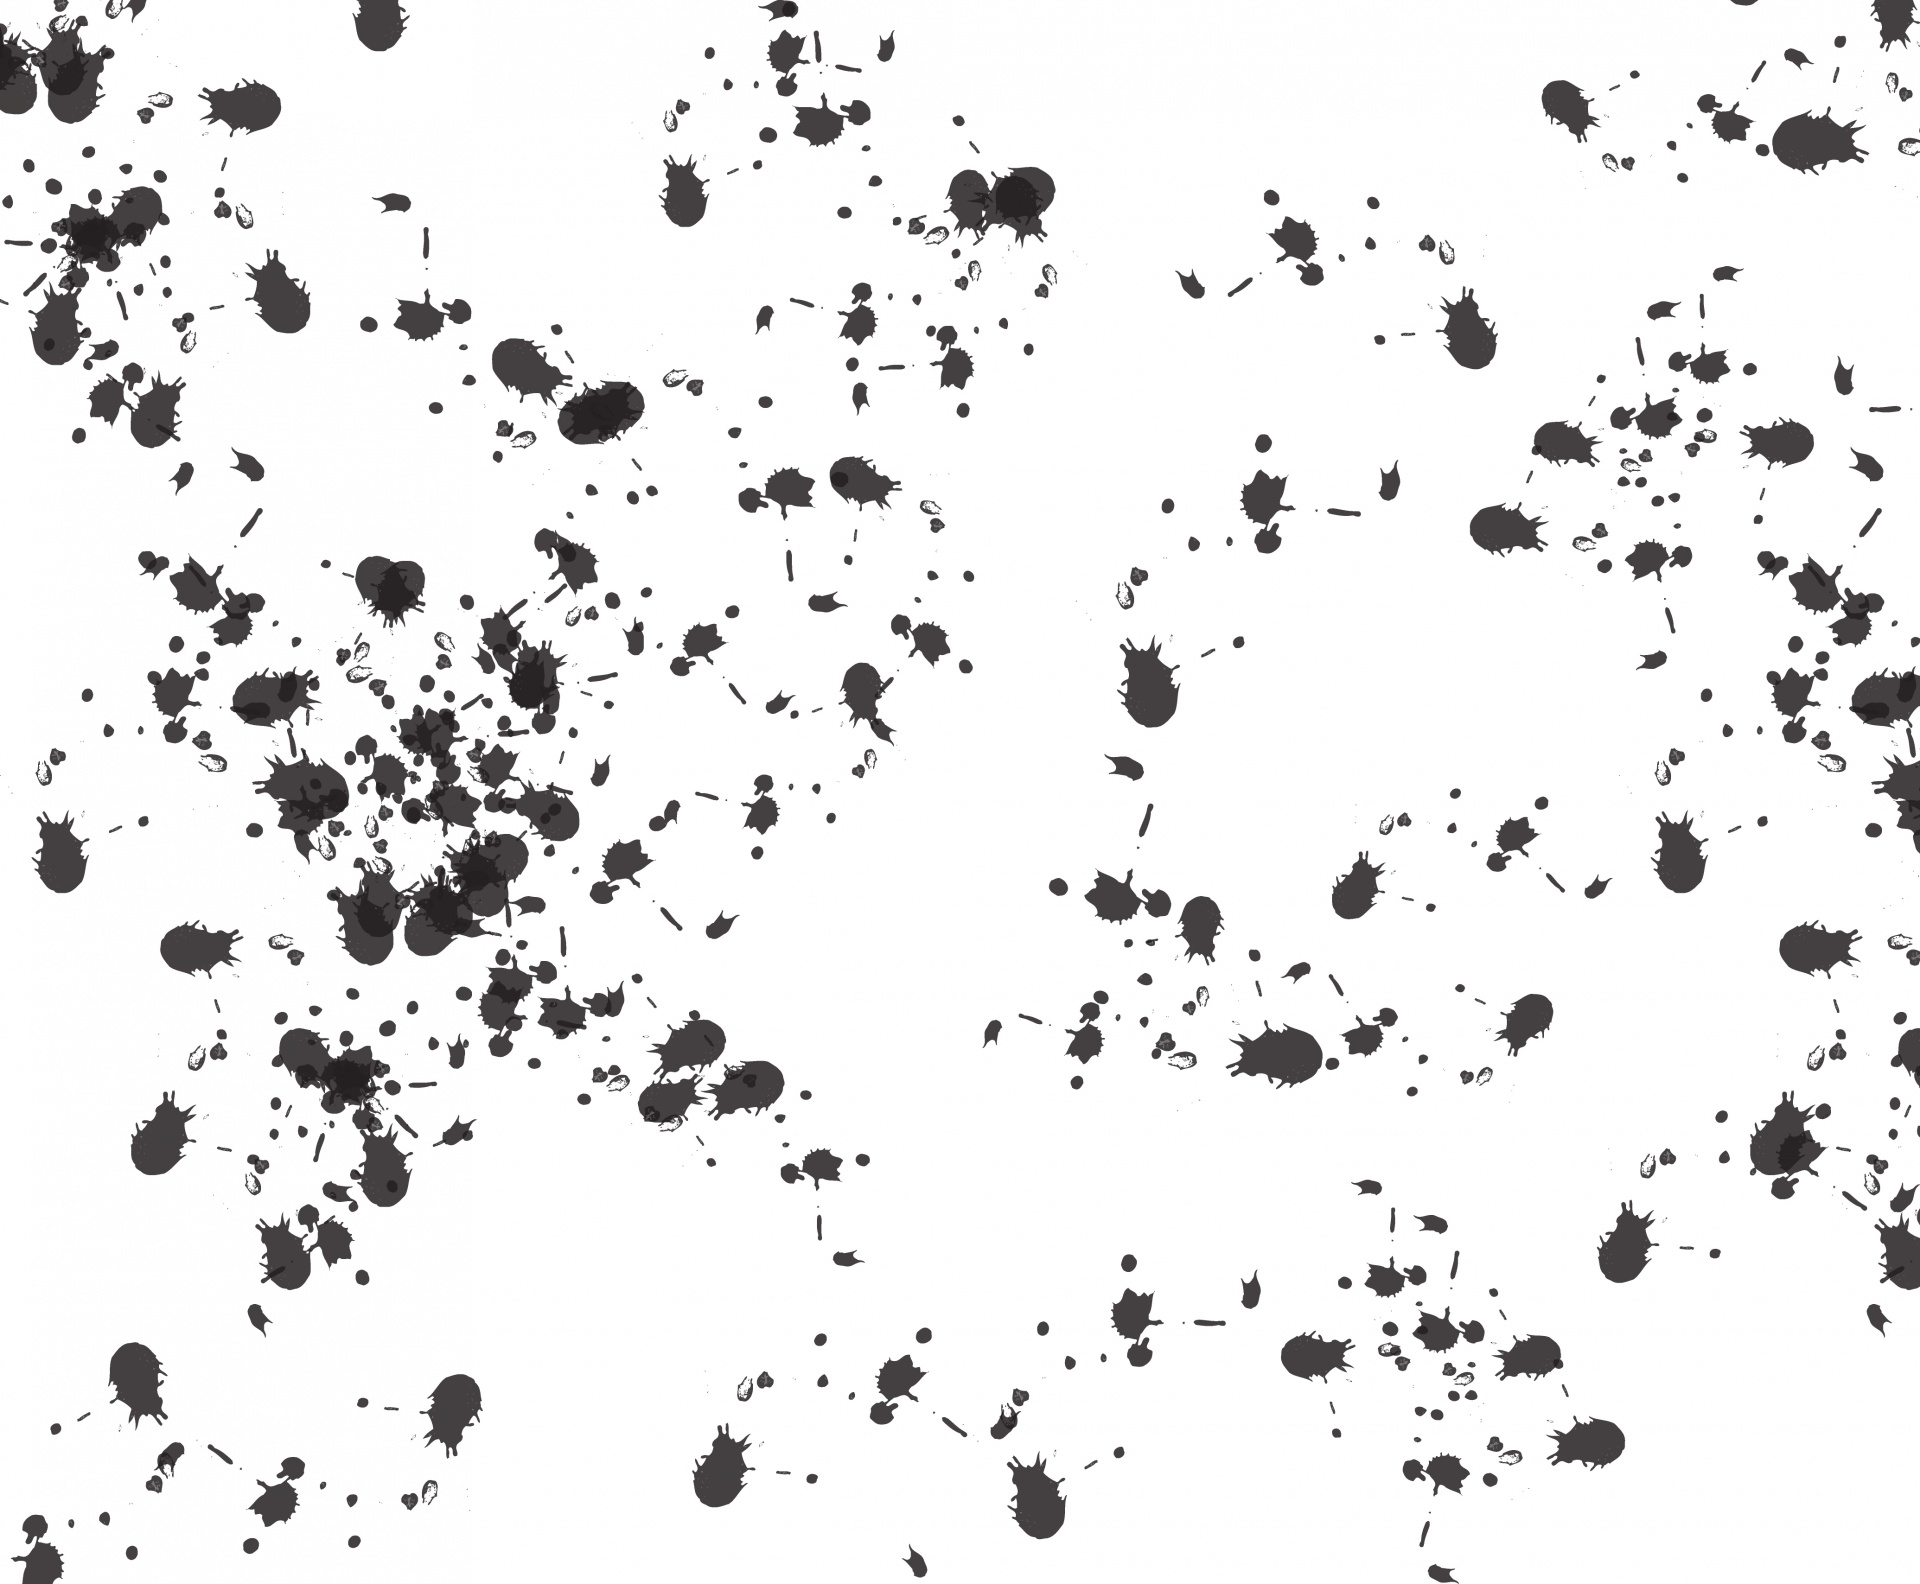 Black and white paint splatters or ink blots background wallpaper